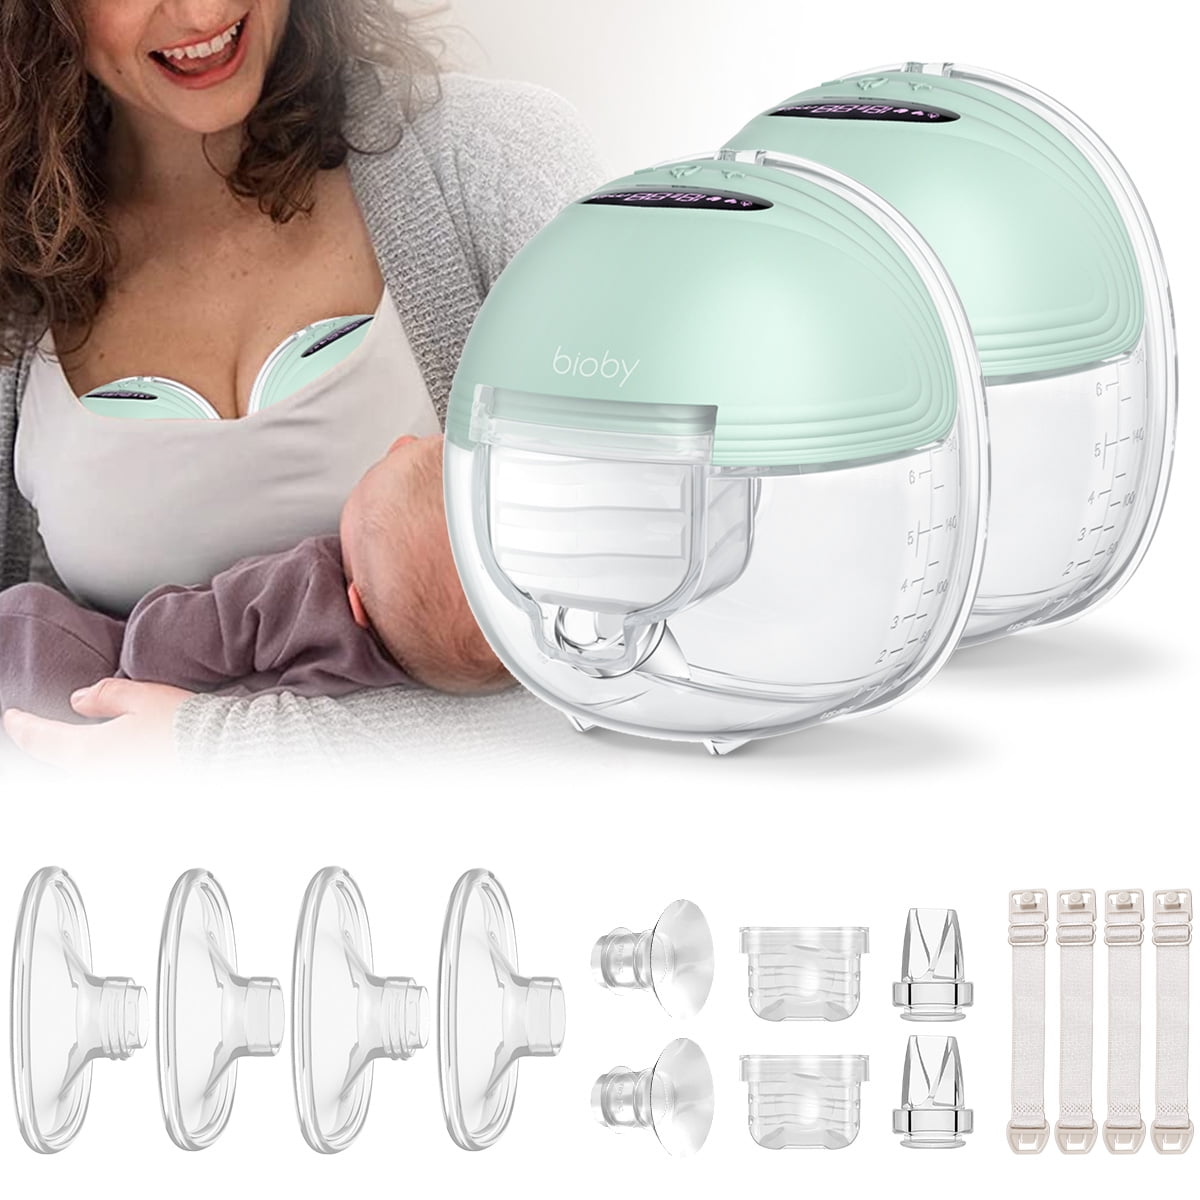 Bioby Portable Electric Breast Pump Milk Extractor Wearable Hand